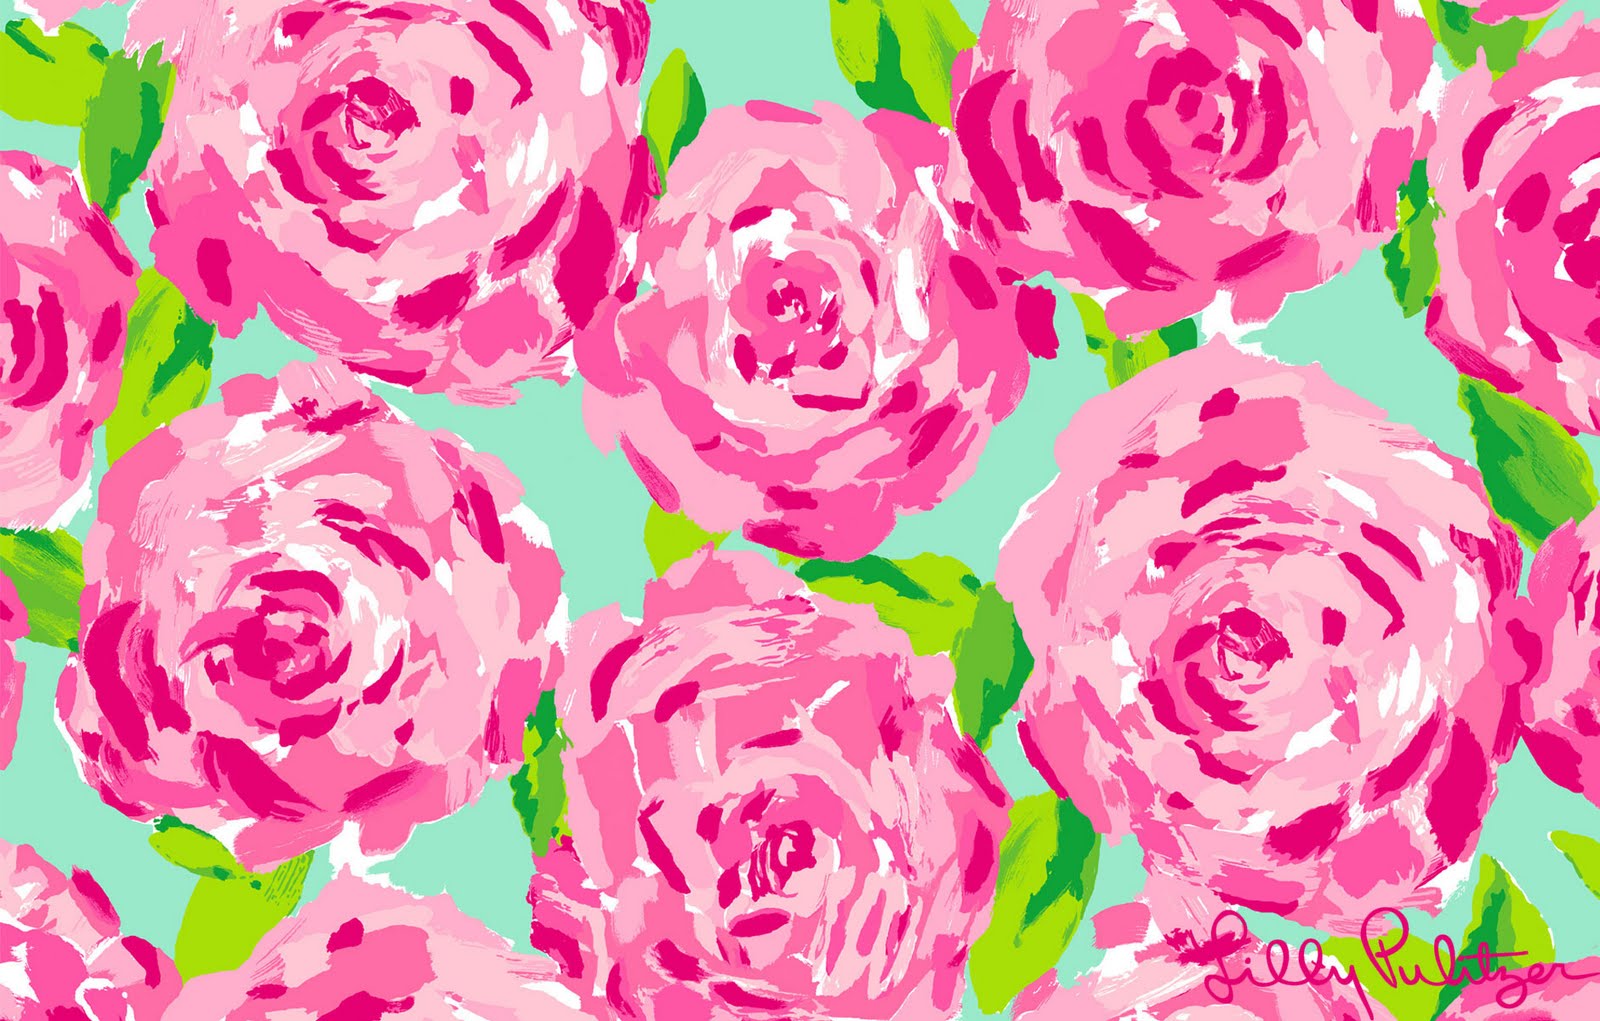 this is the lilly pulitzer pattern that my design is inspired by